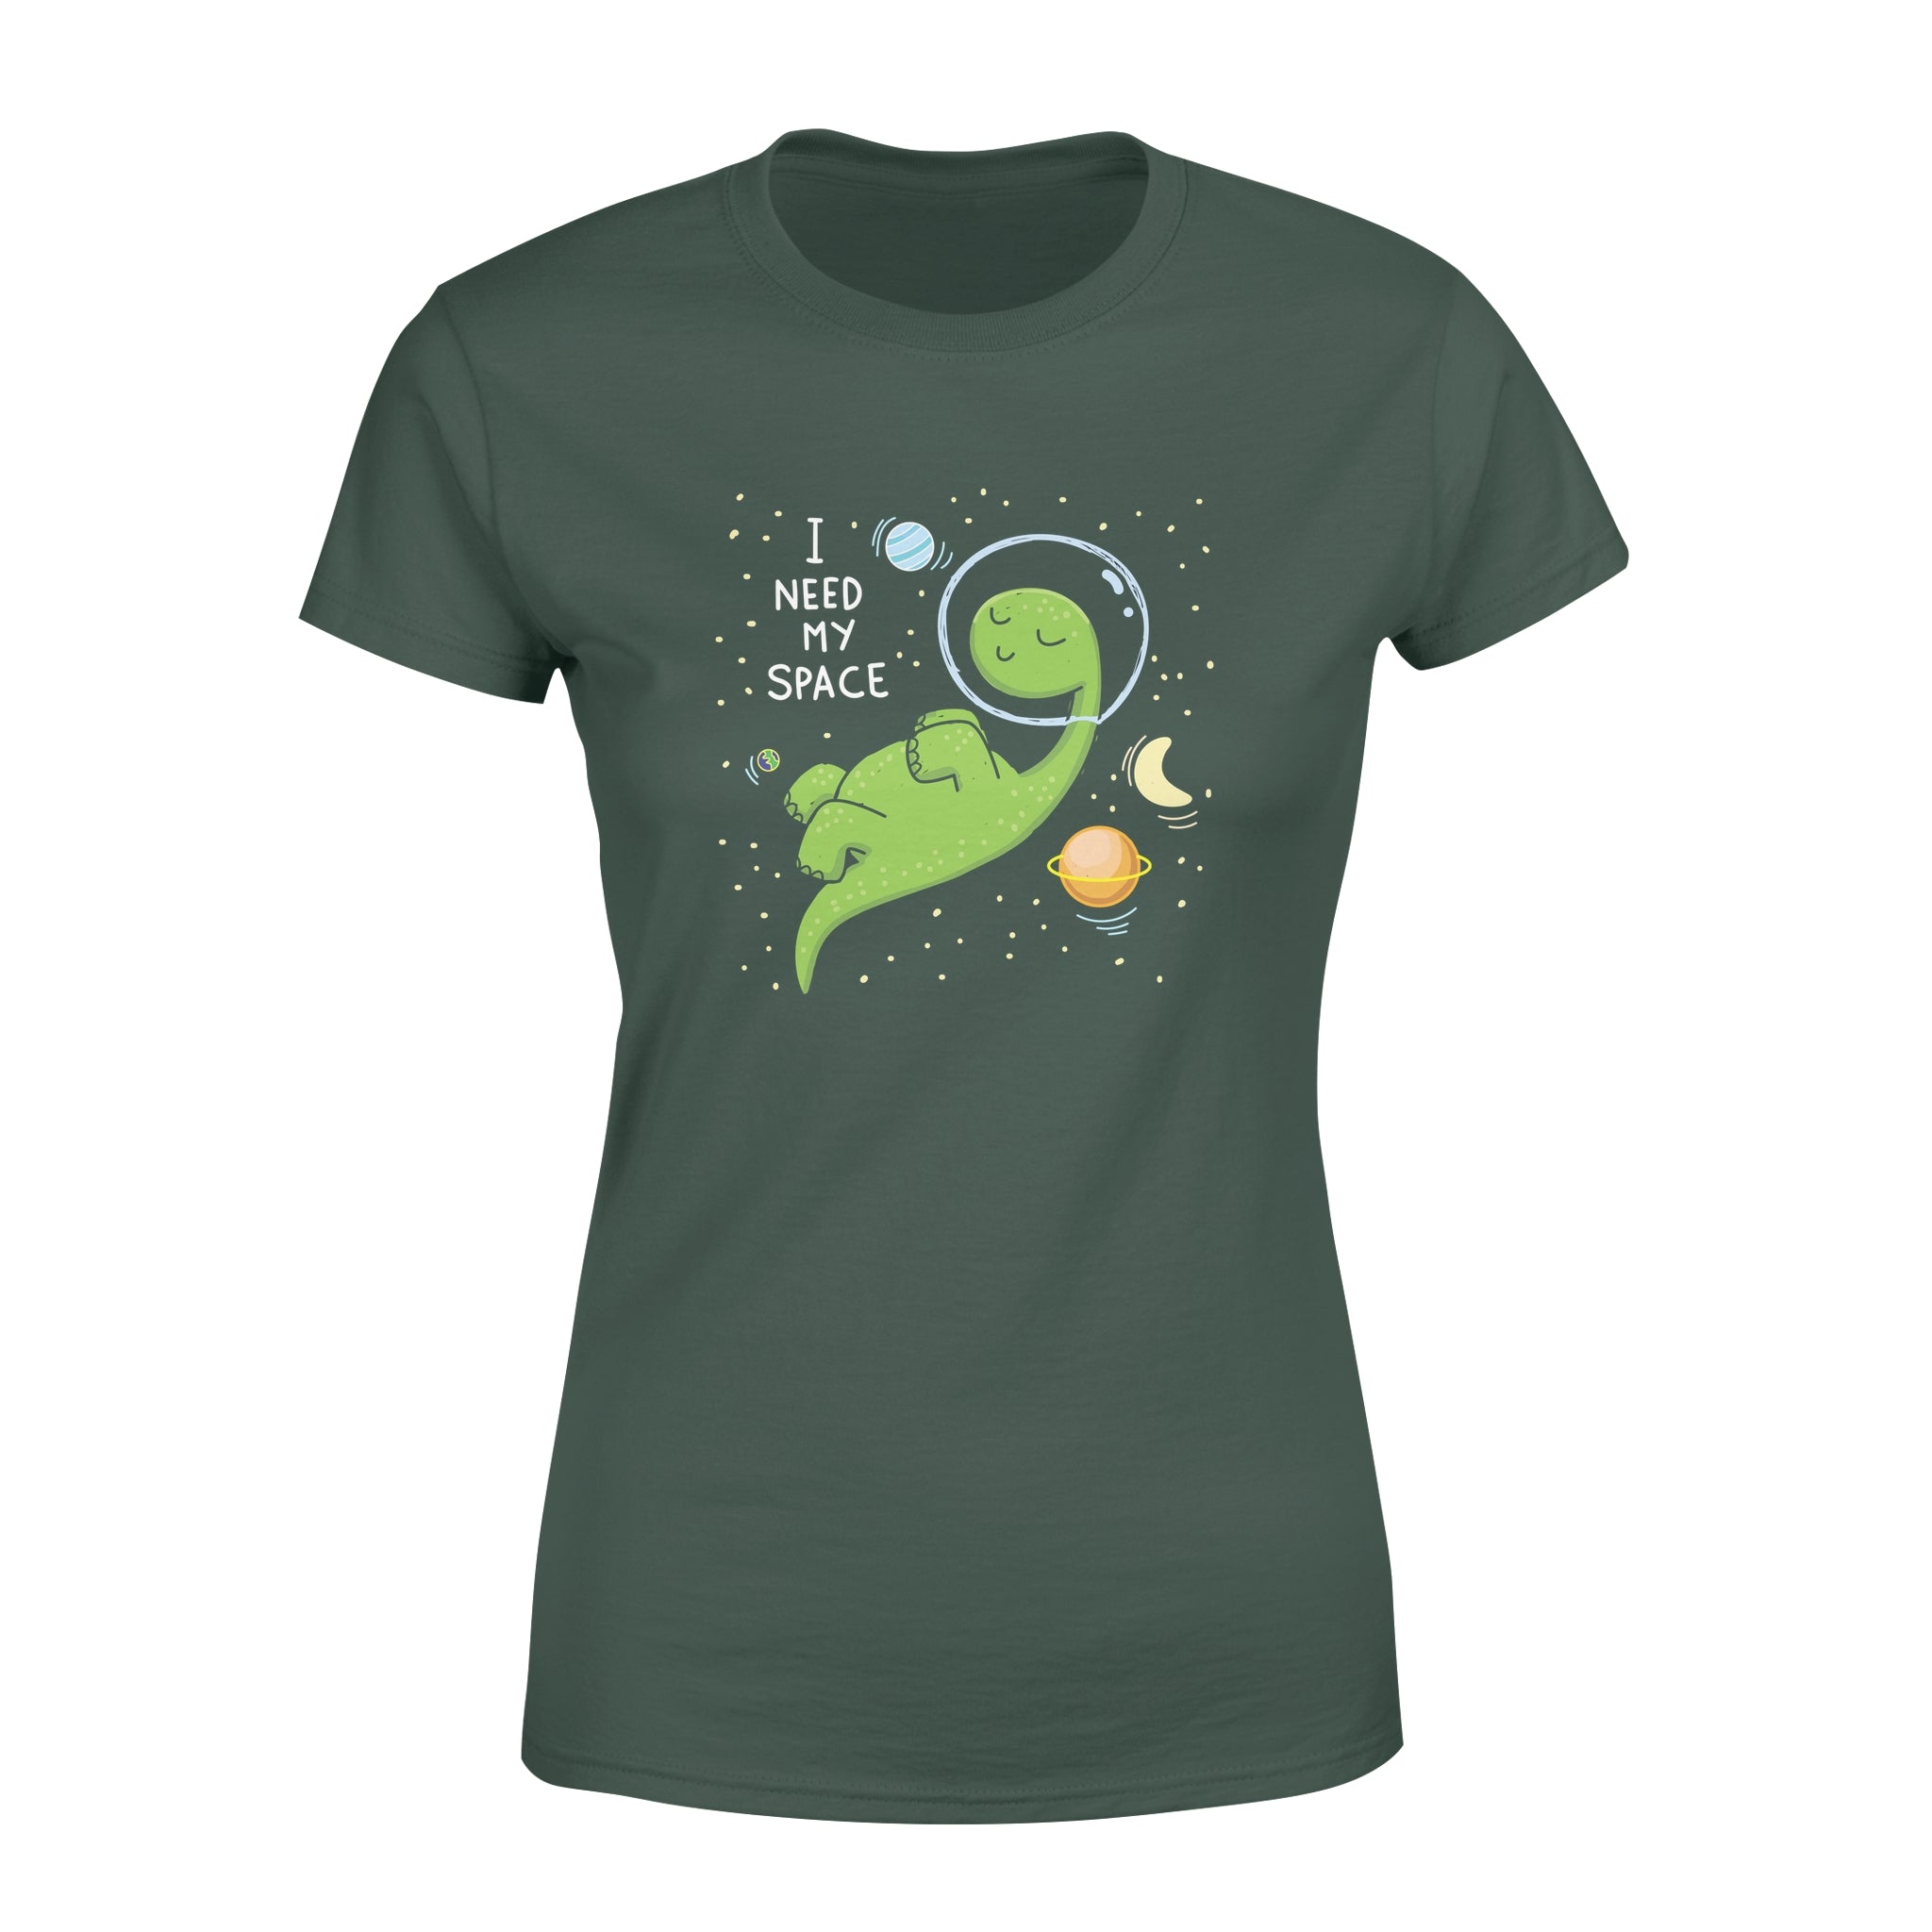 I need more space -  Women's T-shirt